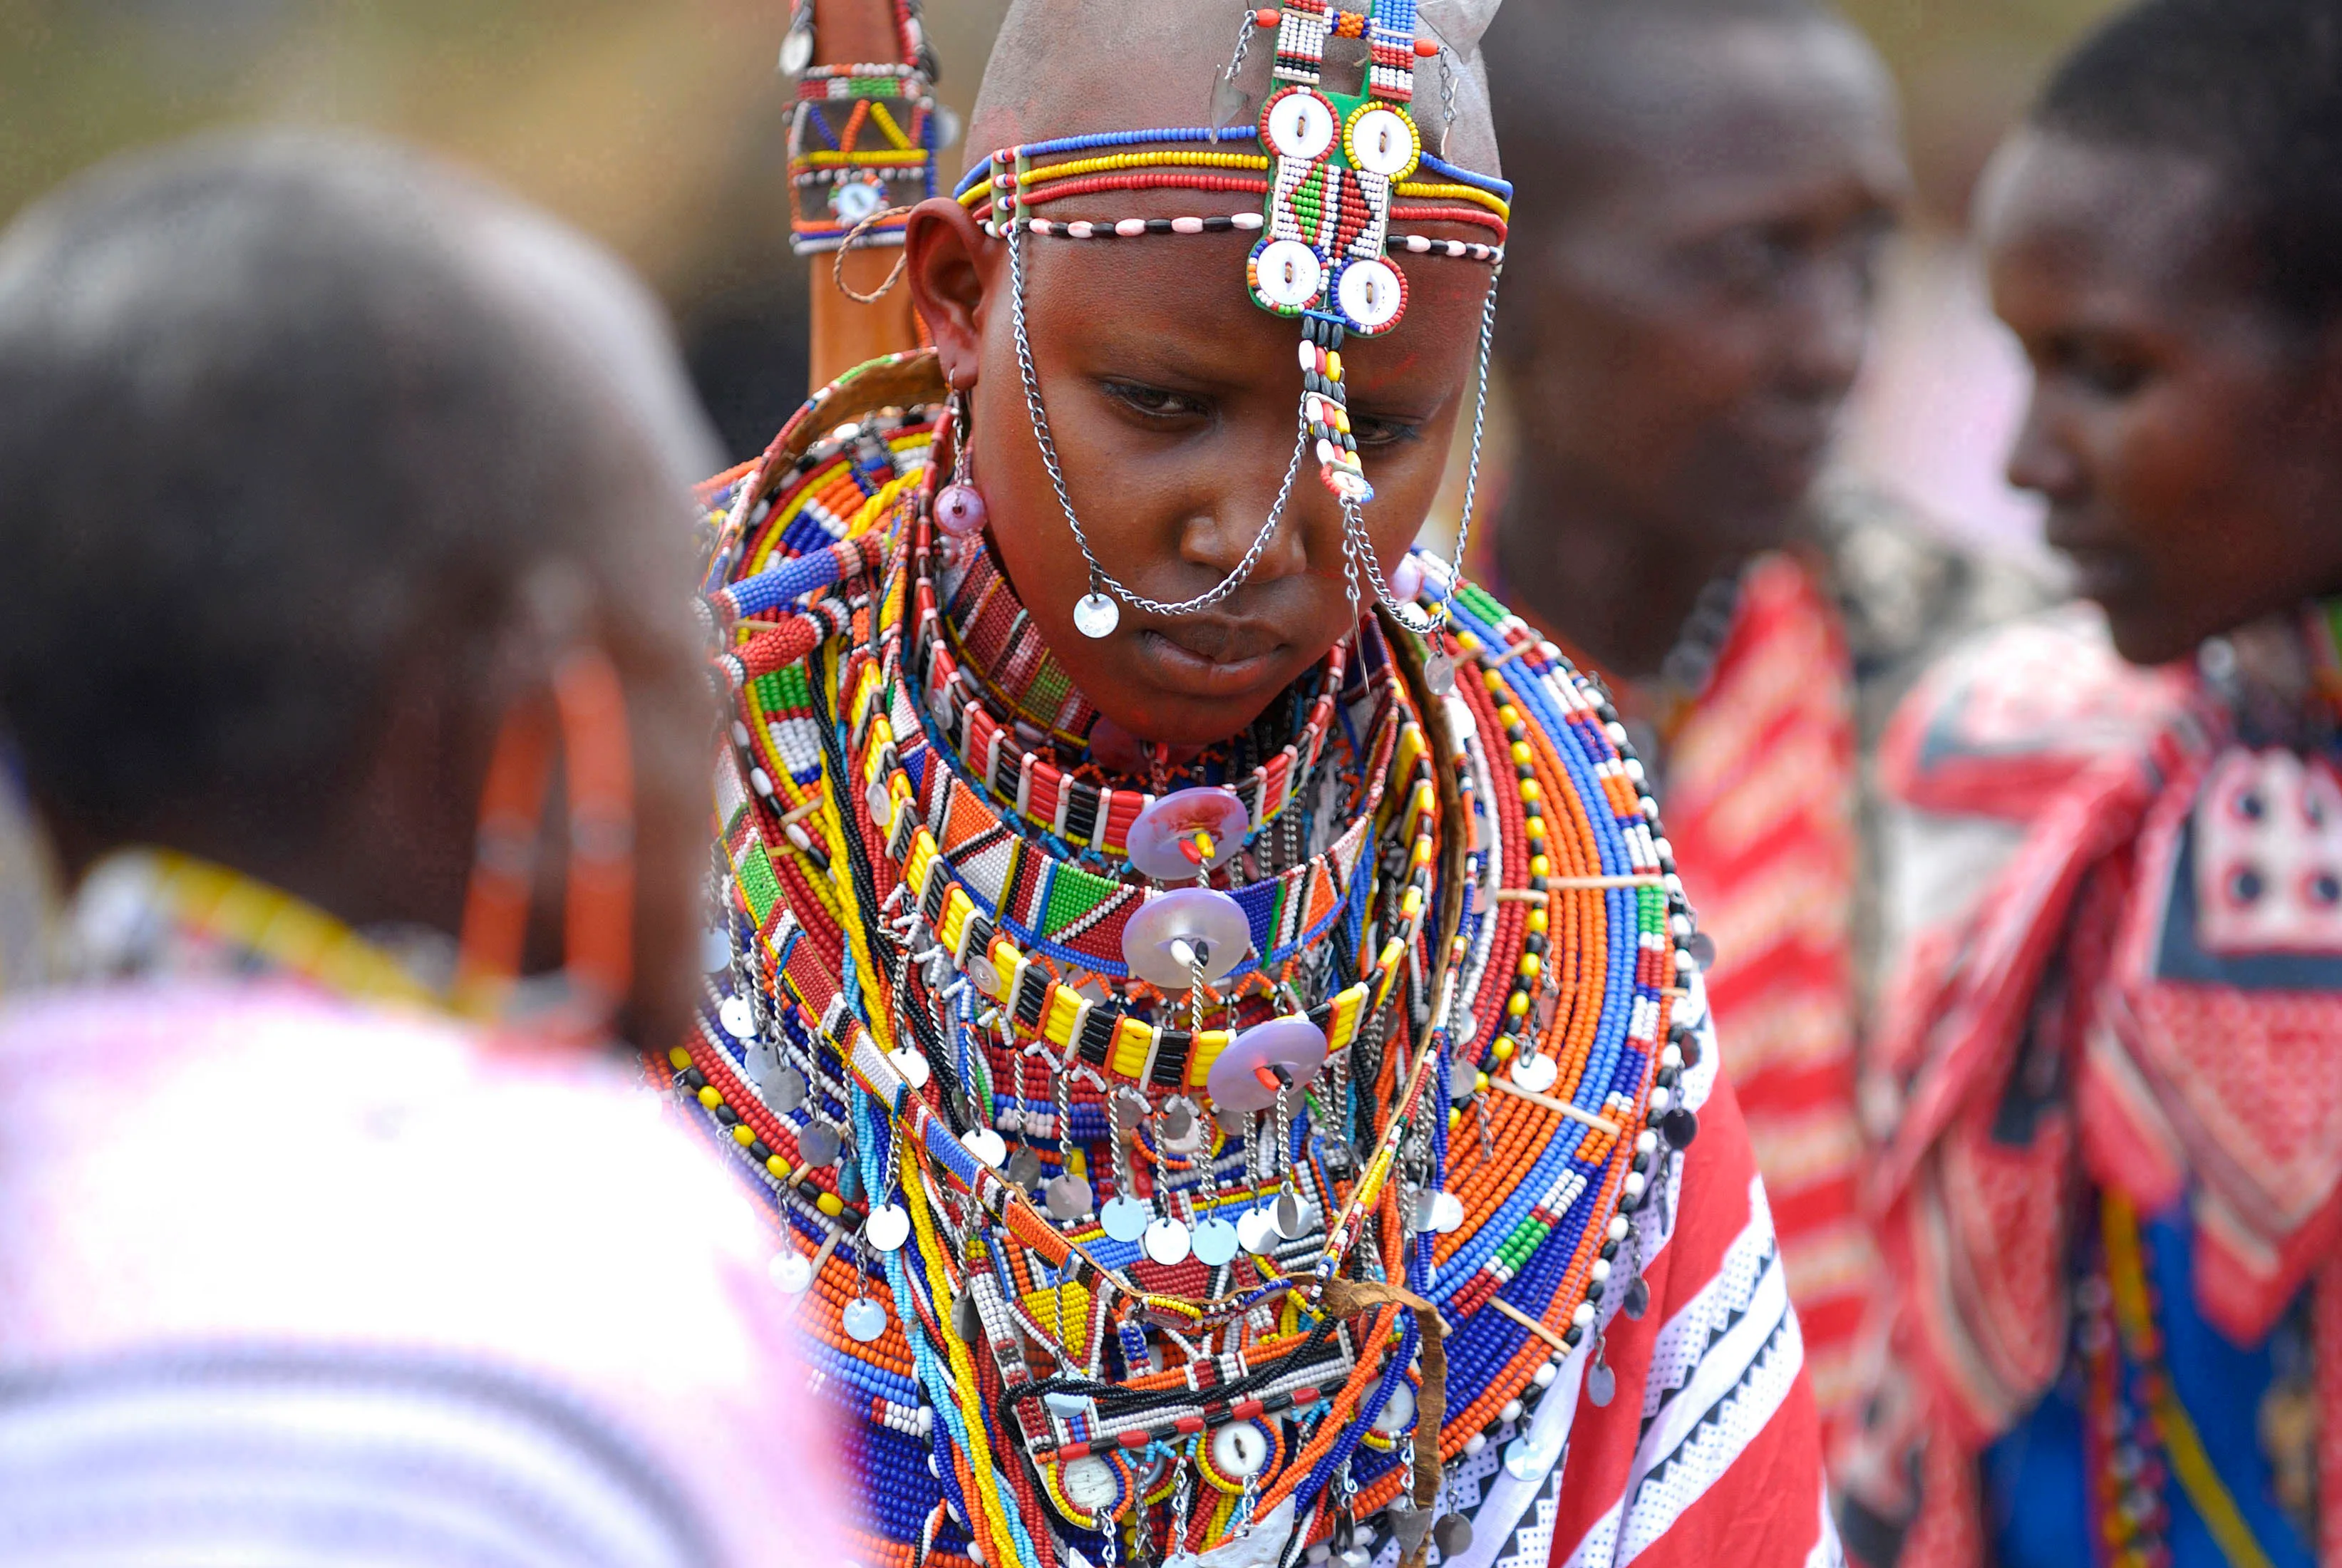 How girls education intersects with Maasai culture in Kenya